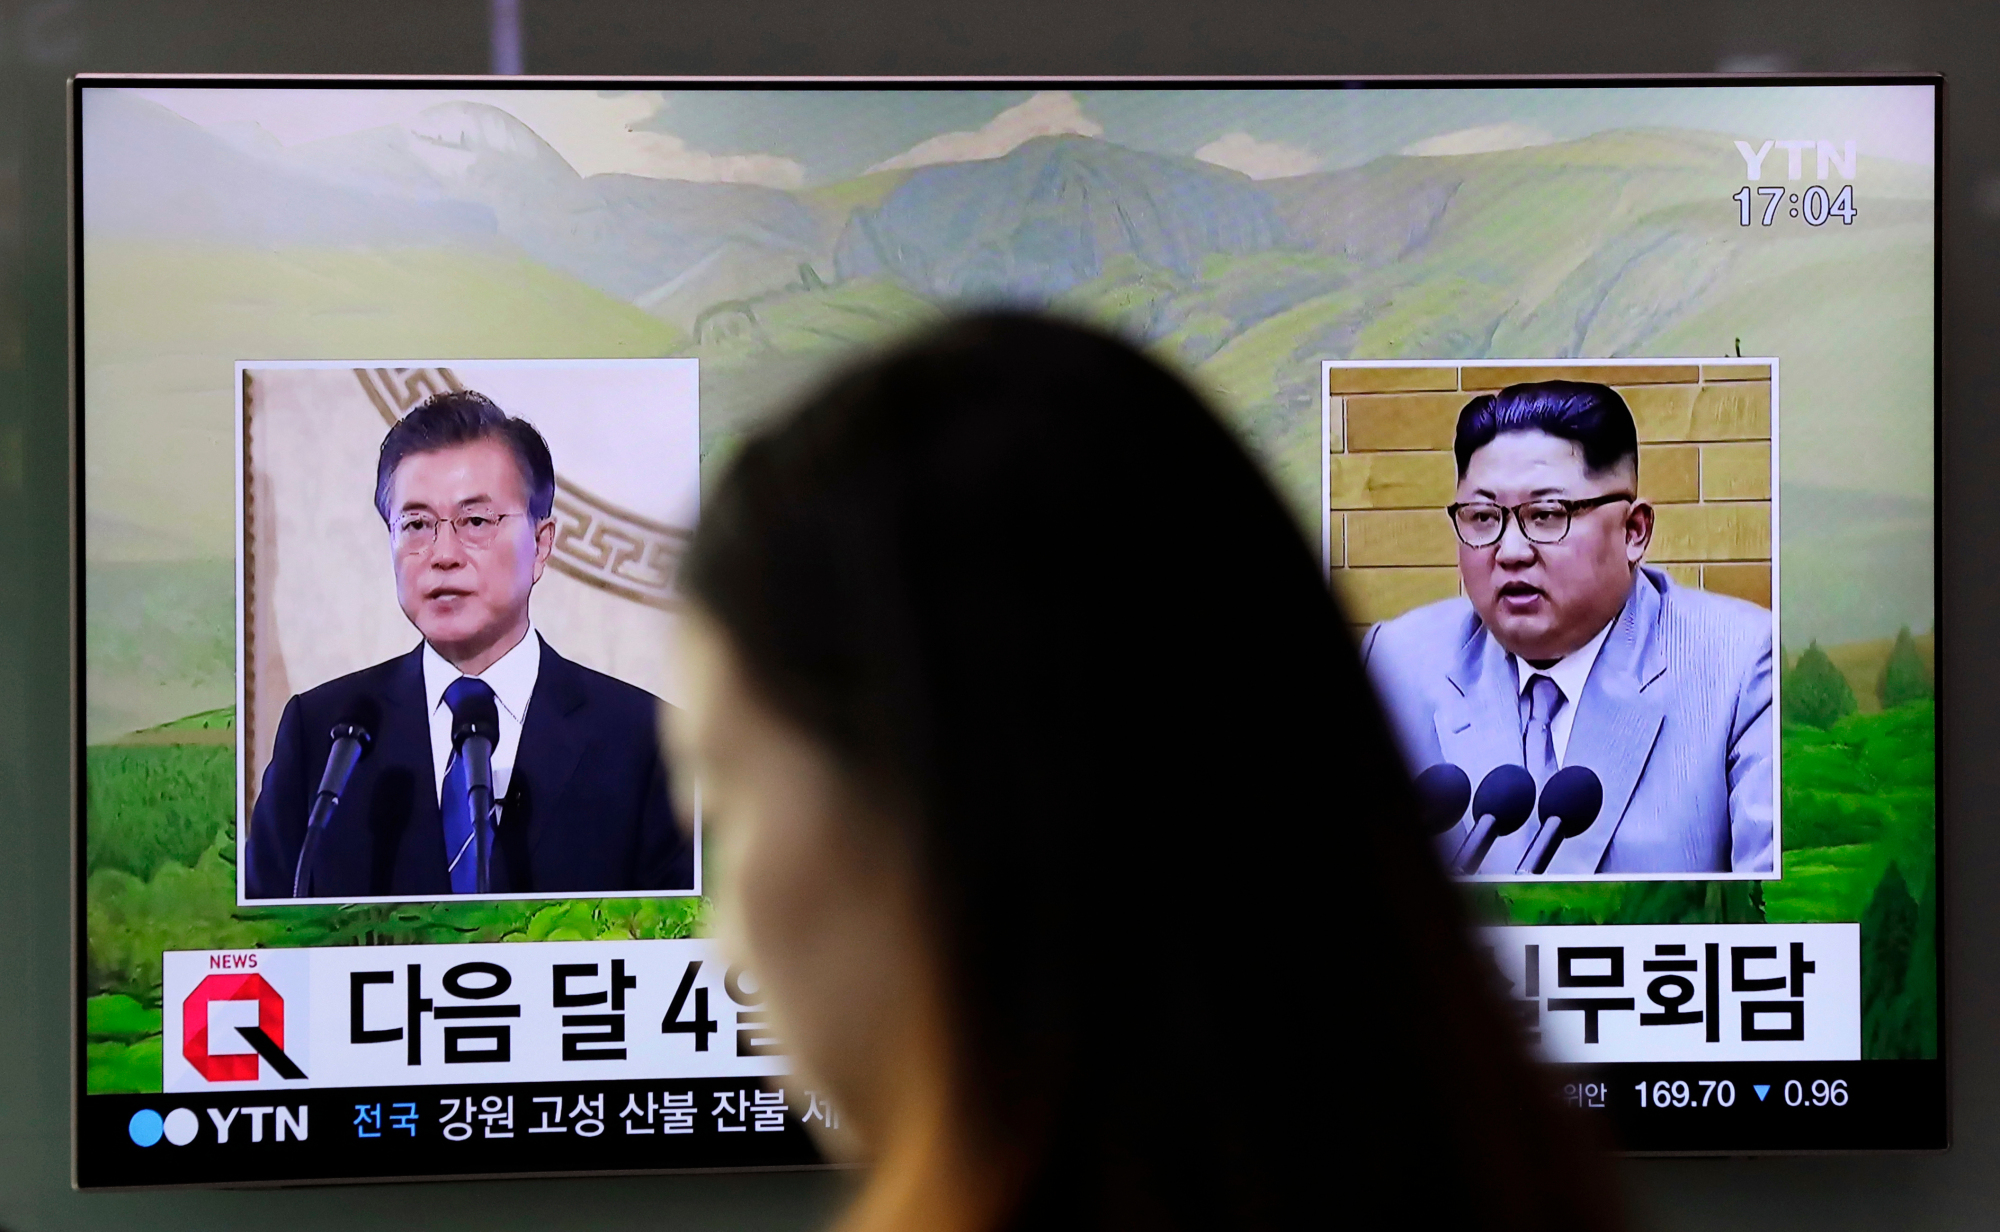 A news program shows file footage of South Korean President Moon Jae-in and North Korean leader Kim Jong Un on a TV screen at the main railway station in Seoul on March 29. | AP